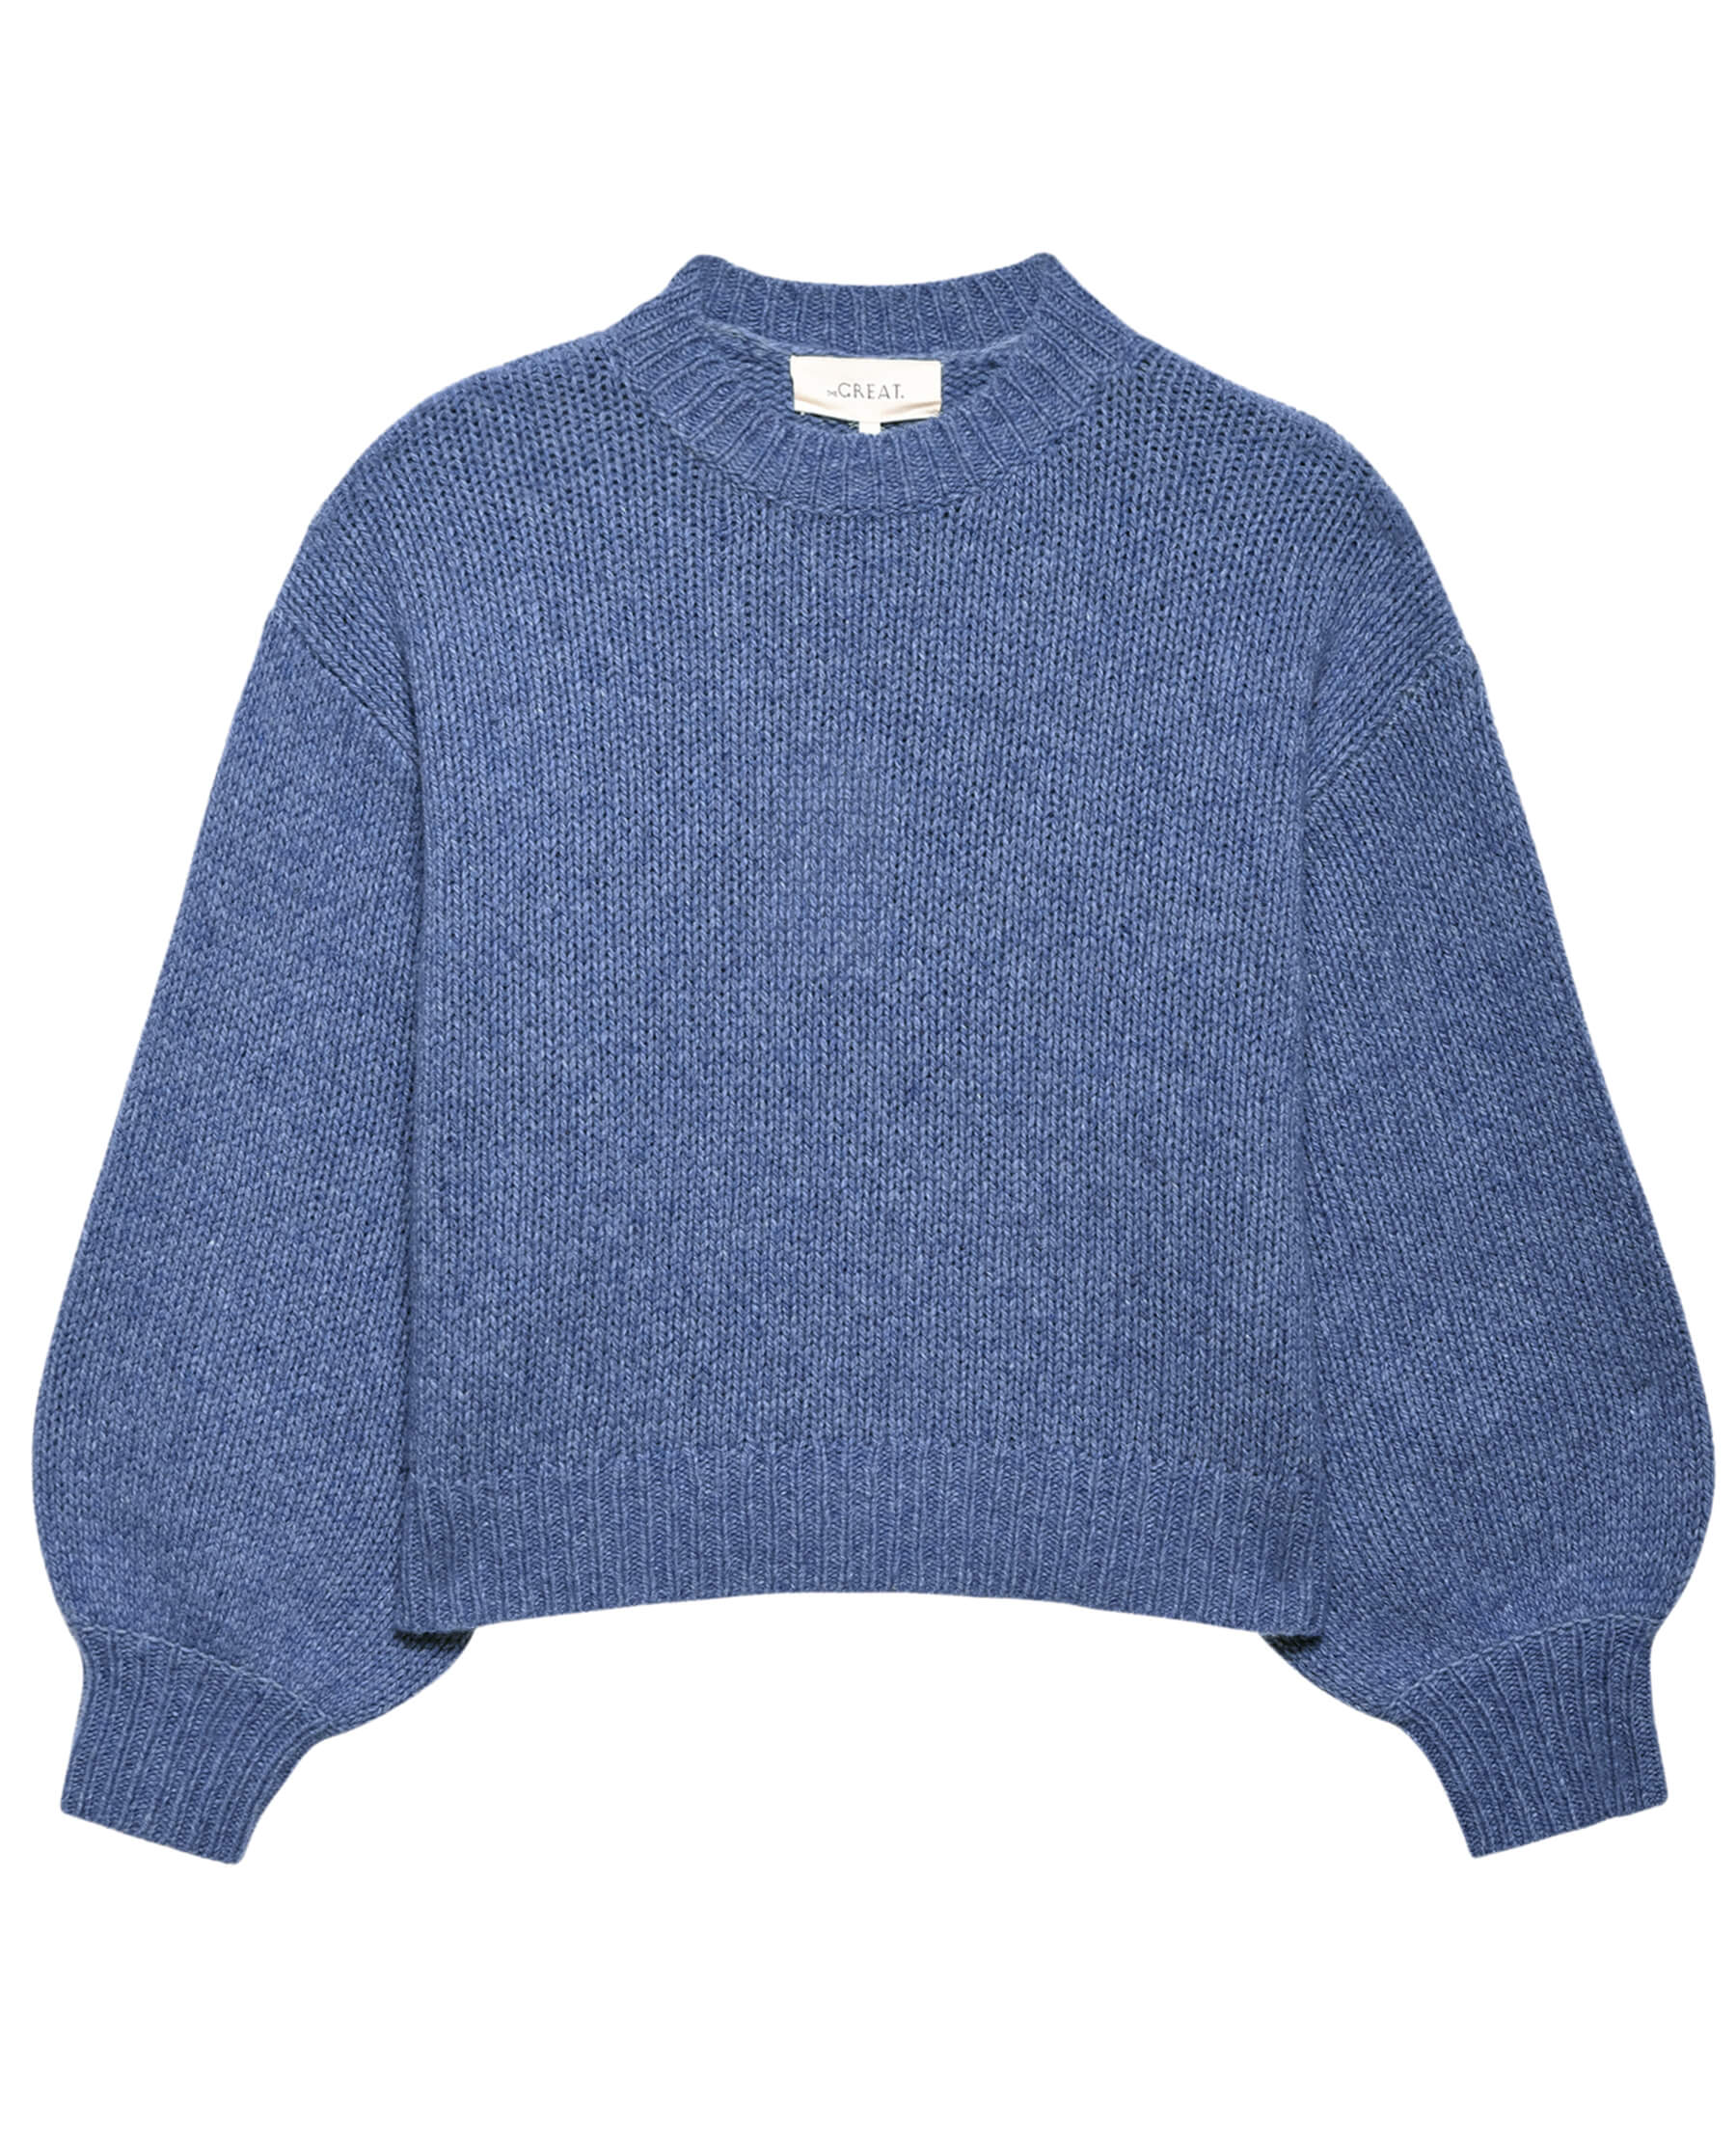 The Bubble Pullover. -- Riverbed SWEATERS THE GREAT. PS24 SALE